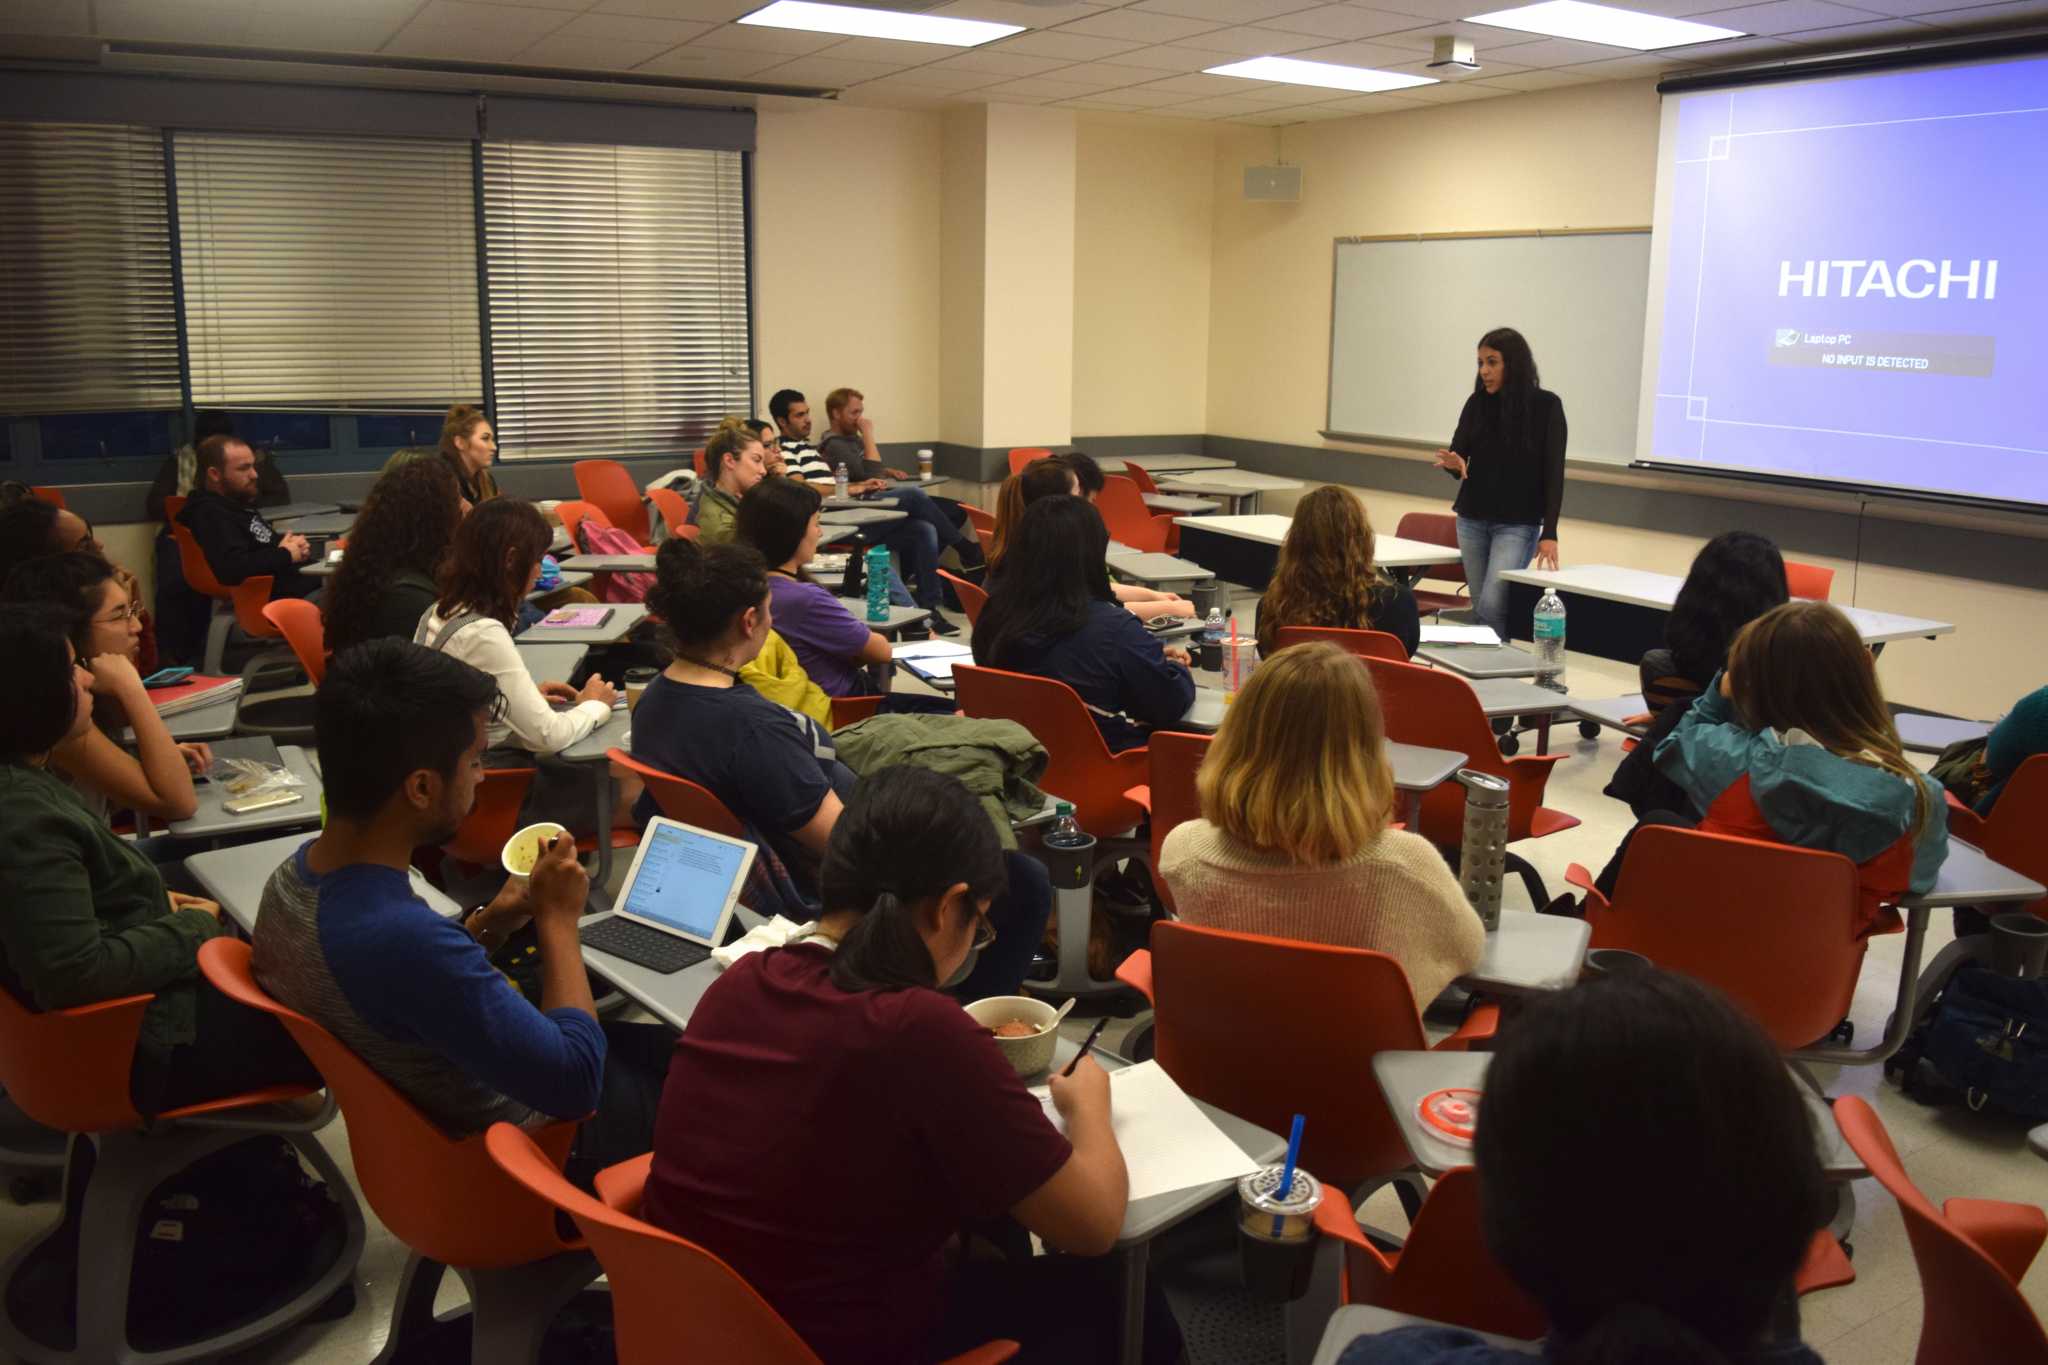 BE Foundation founder Karen Mercado speaks to a full classroom in the Humanities
Building on Thursday, Oct. 27, 2016. (Eric Chan / Xpress)